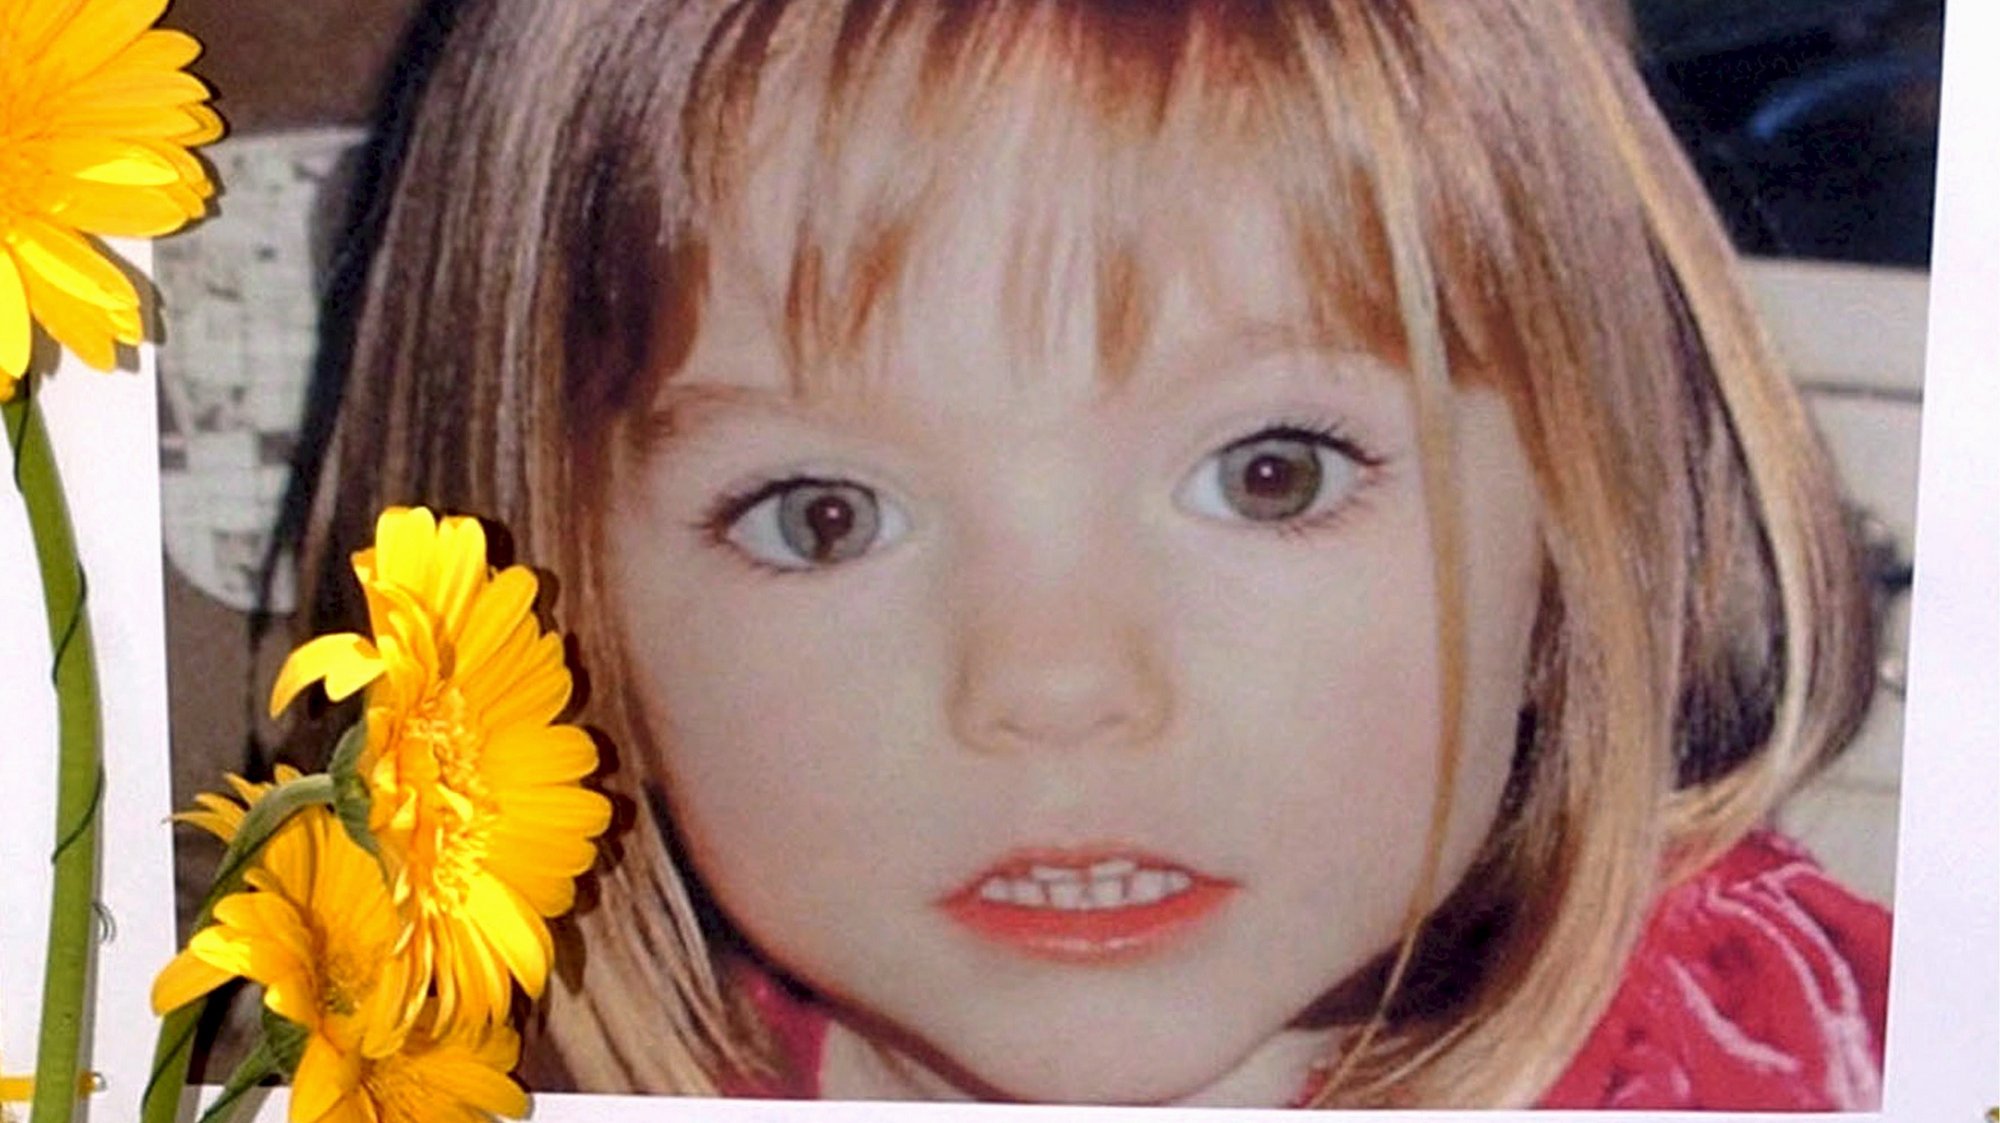 epa08463380 (FILE) A file photograph dated 12 May 2007, reissued 04 May 2019 shows a poster displayed of three-year-old Madeleine McCann, a British girl who went missing in 2007 while on holiday with her parents in Praia da Luz, in Lagos, Portugal. According to reports on 03 June 2020, a 43-year old German prisoner is identified as suspect in the disappearance of Madeleine McCann.  EPA/LUIS FORRA *** Local Caption *** 55167130